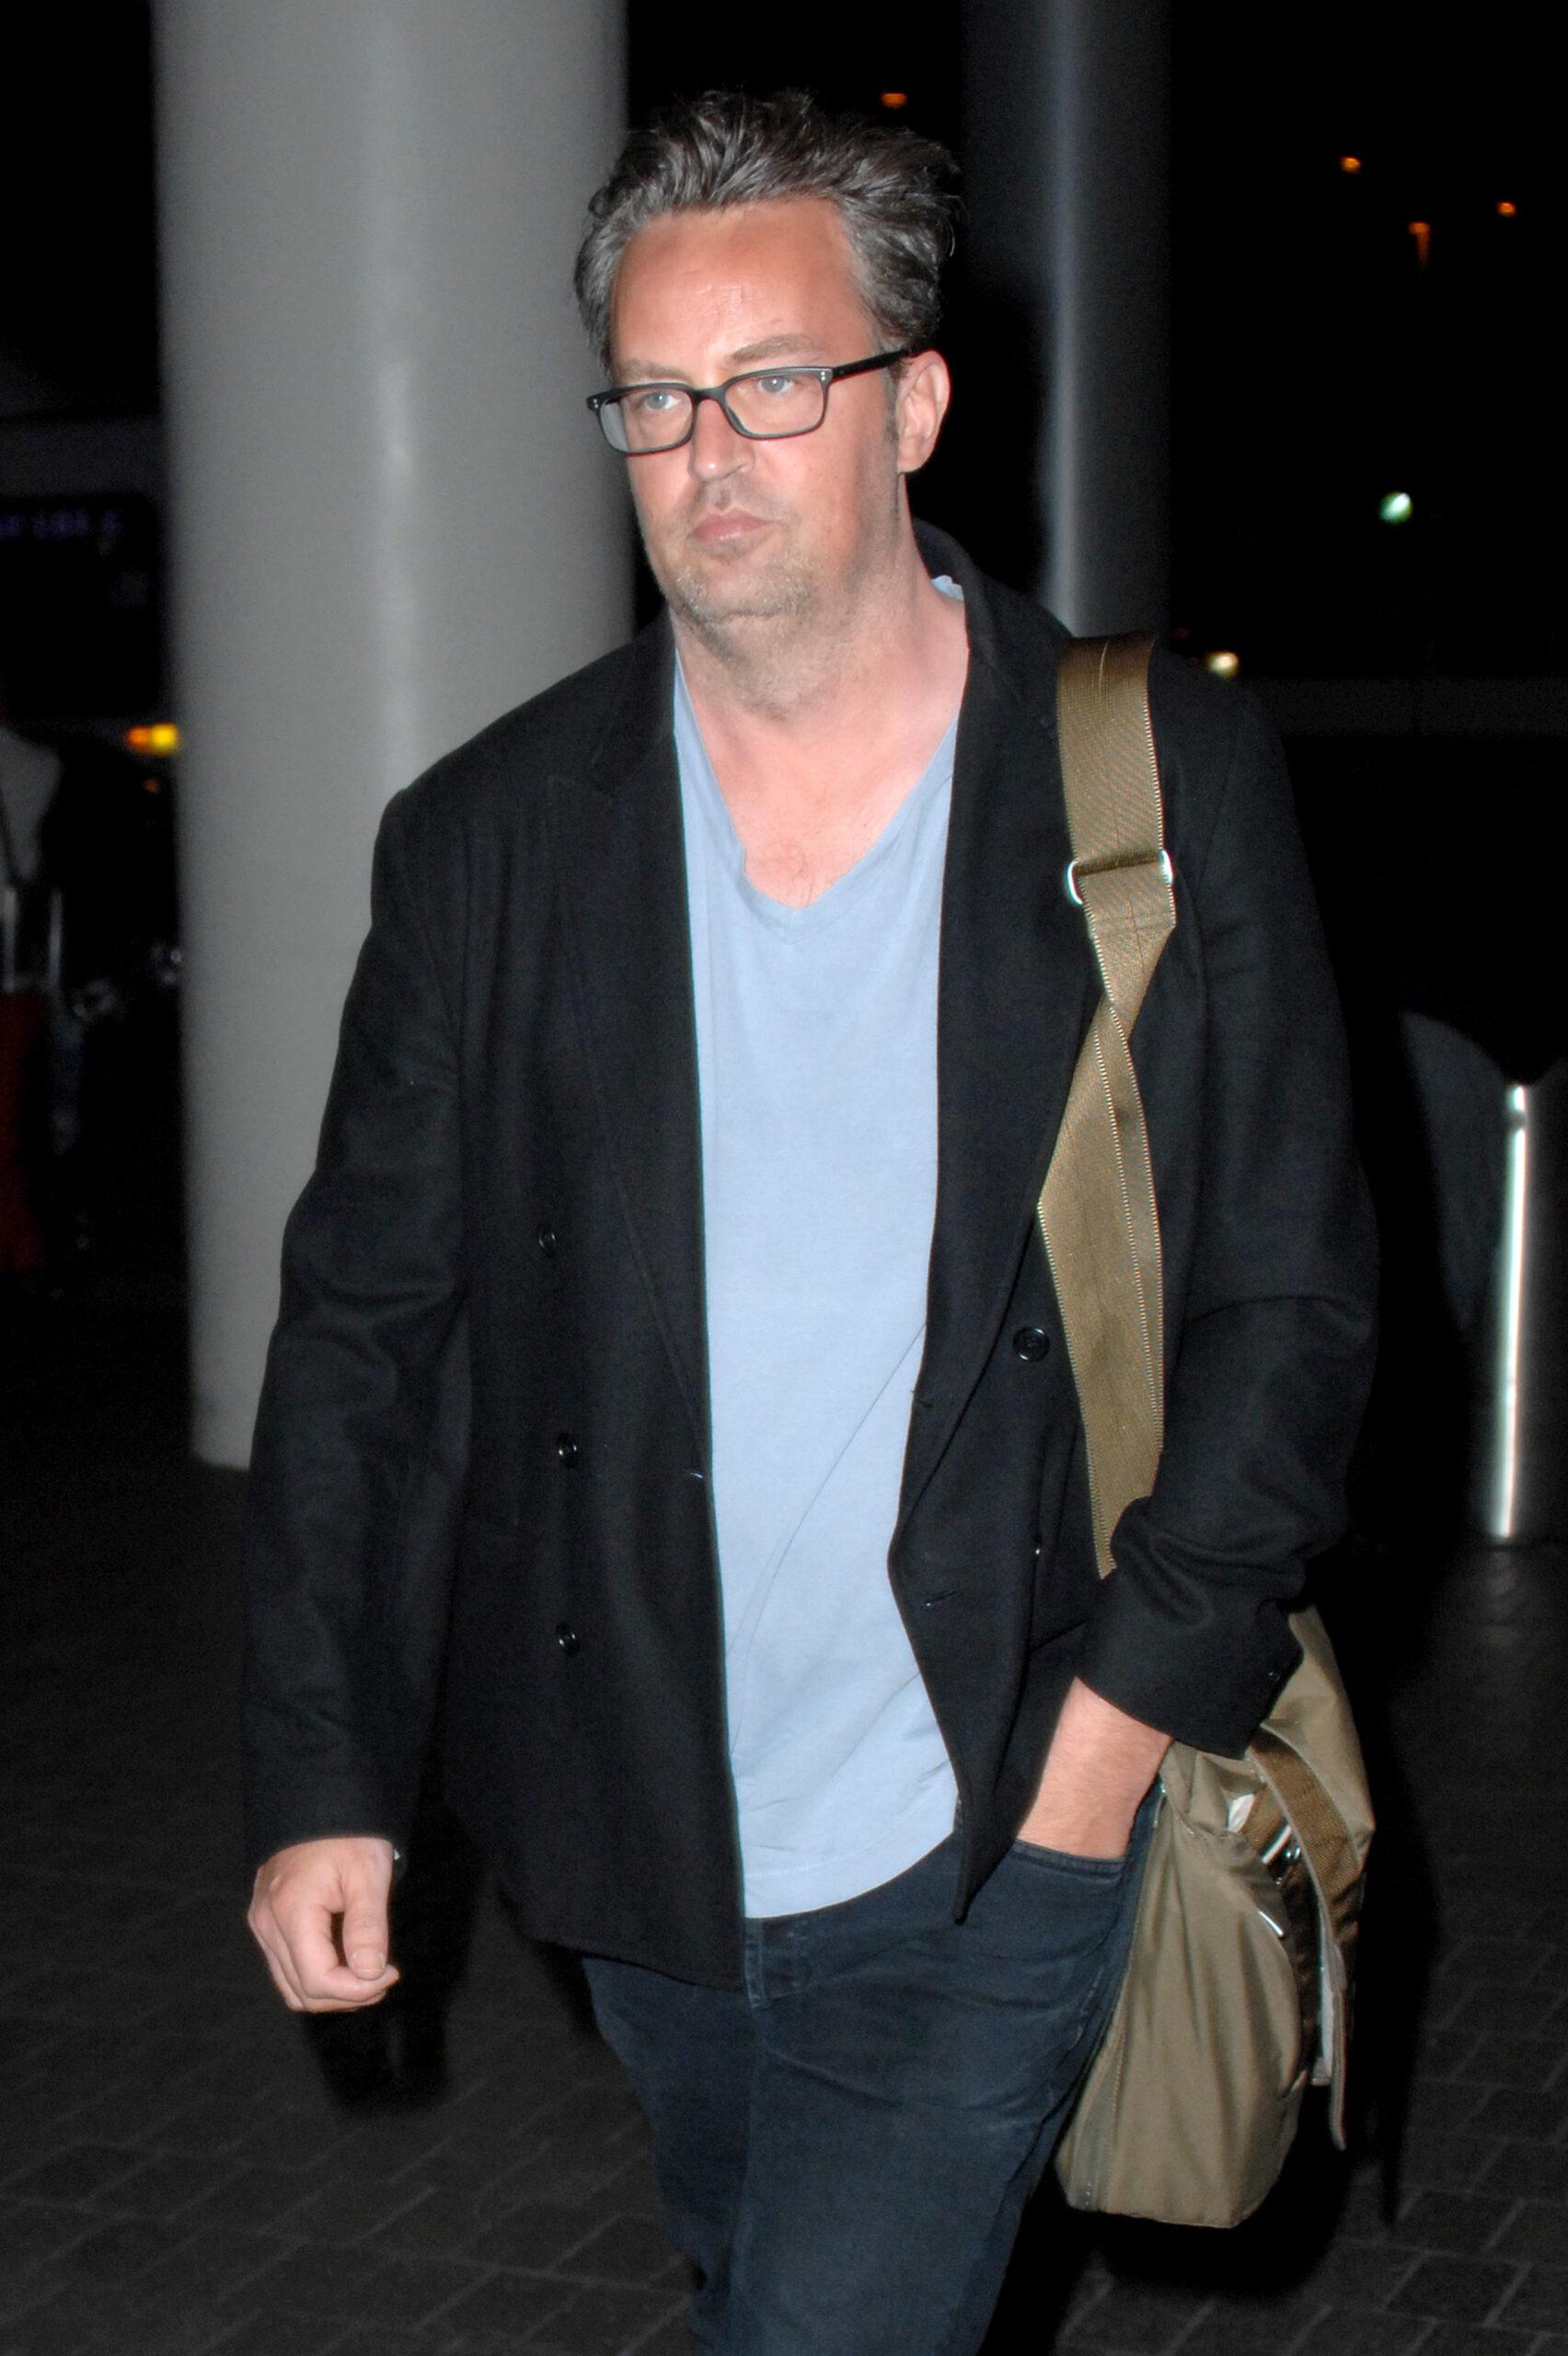 Matthew Perry shows off a fuller figure and double chin as he arrives at LAX airport